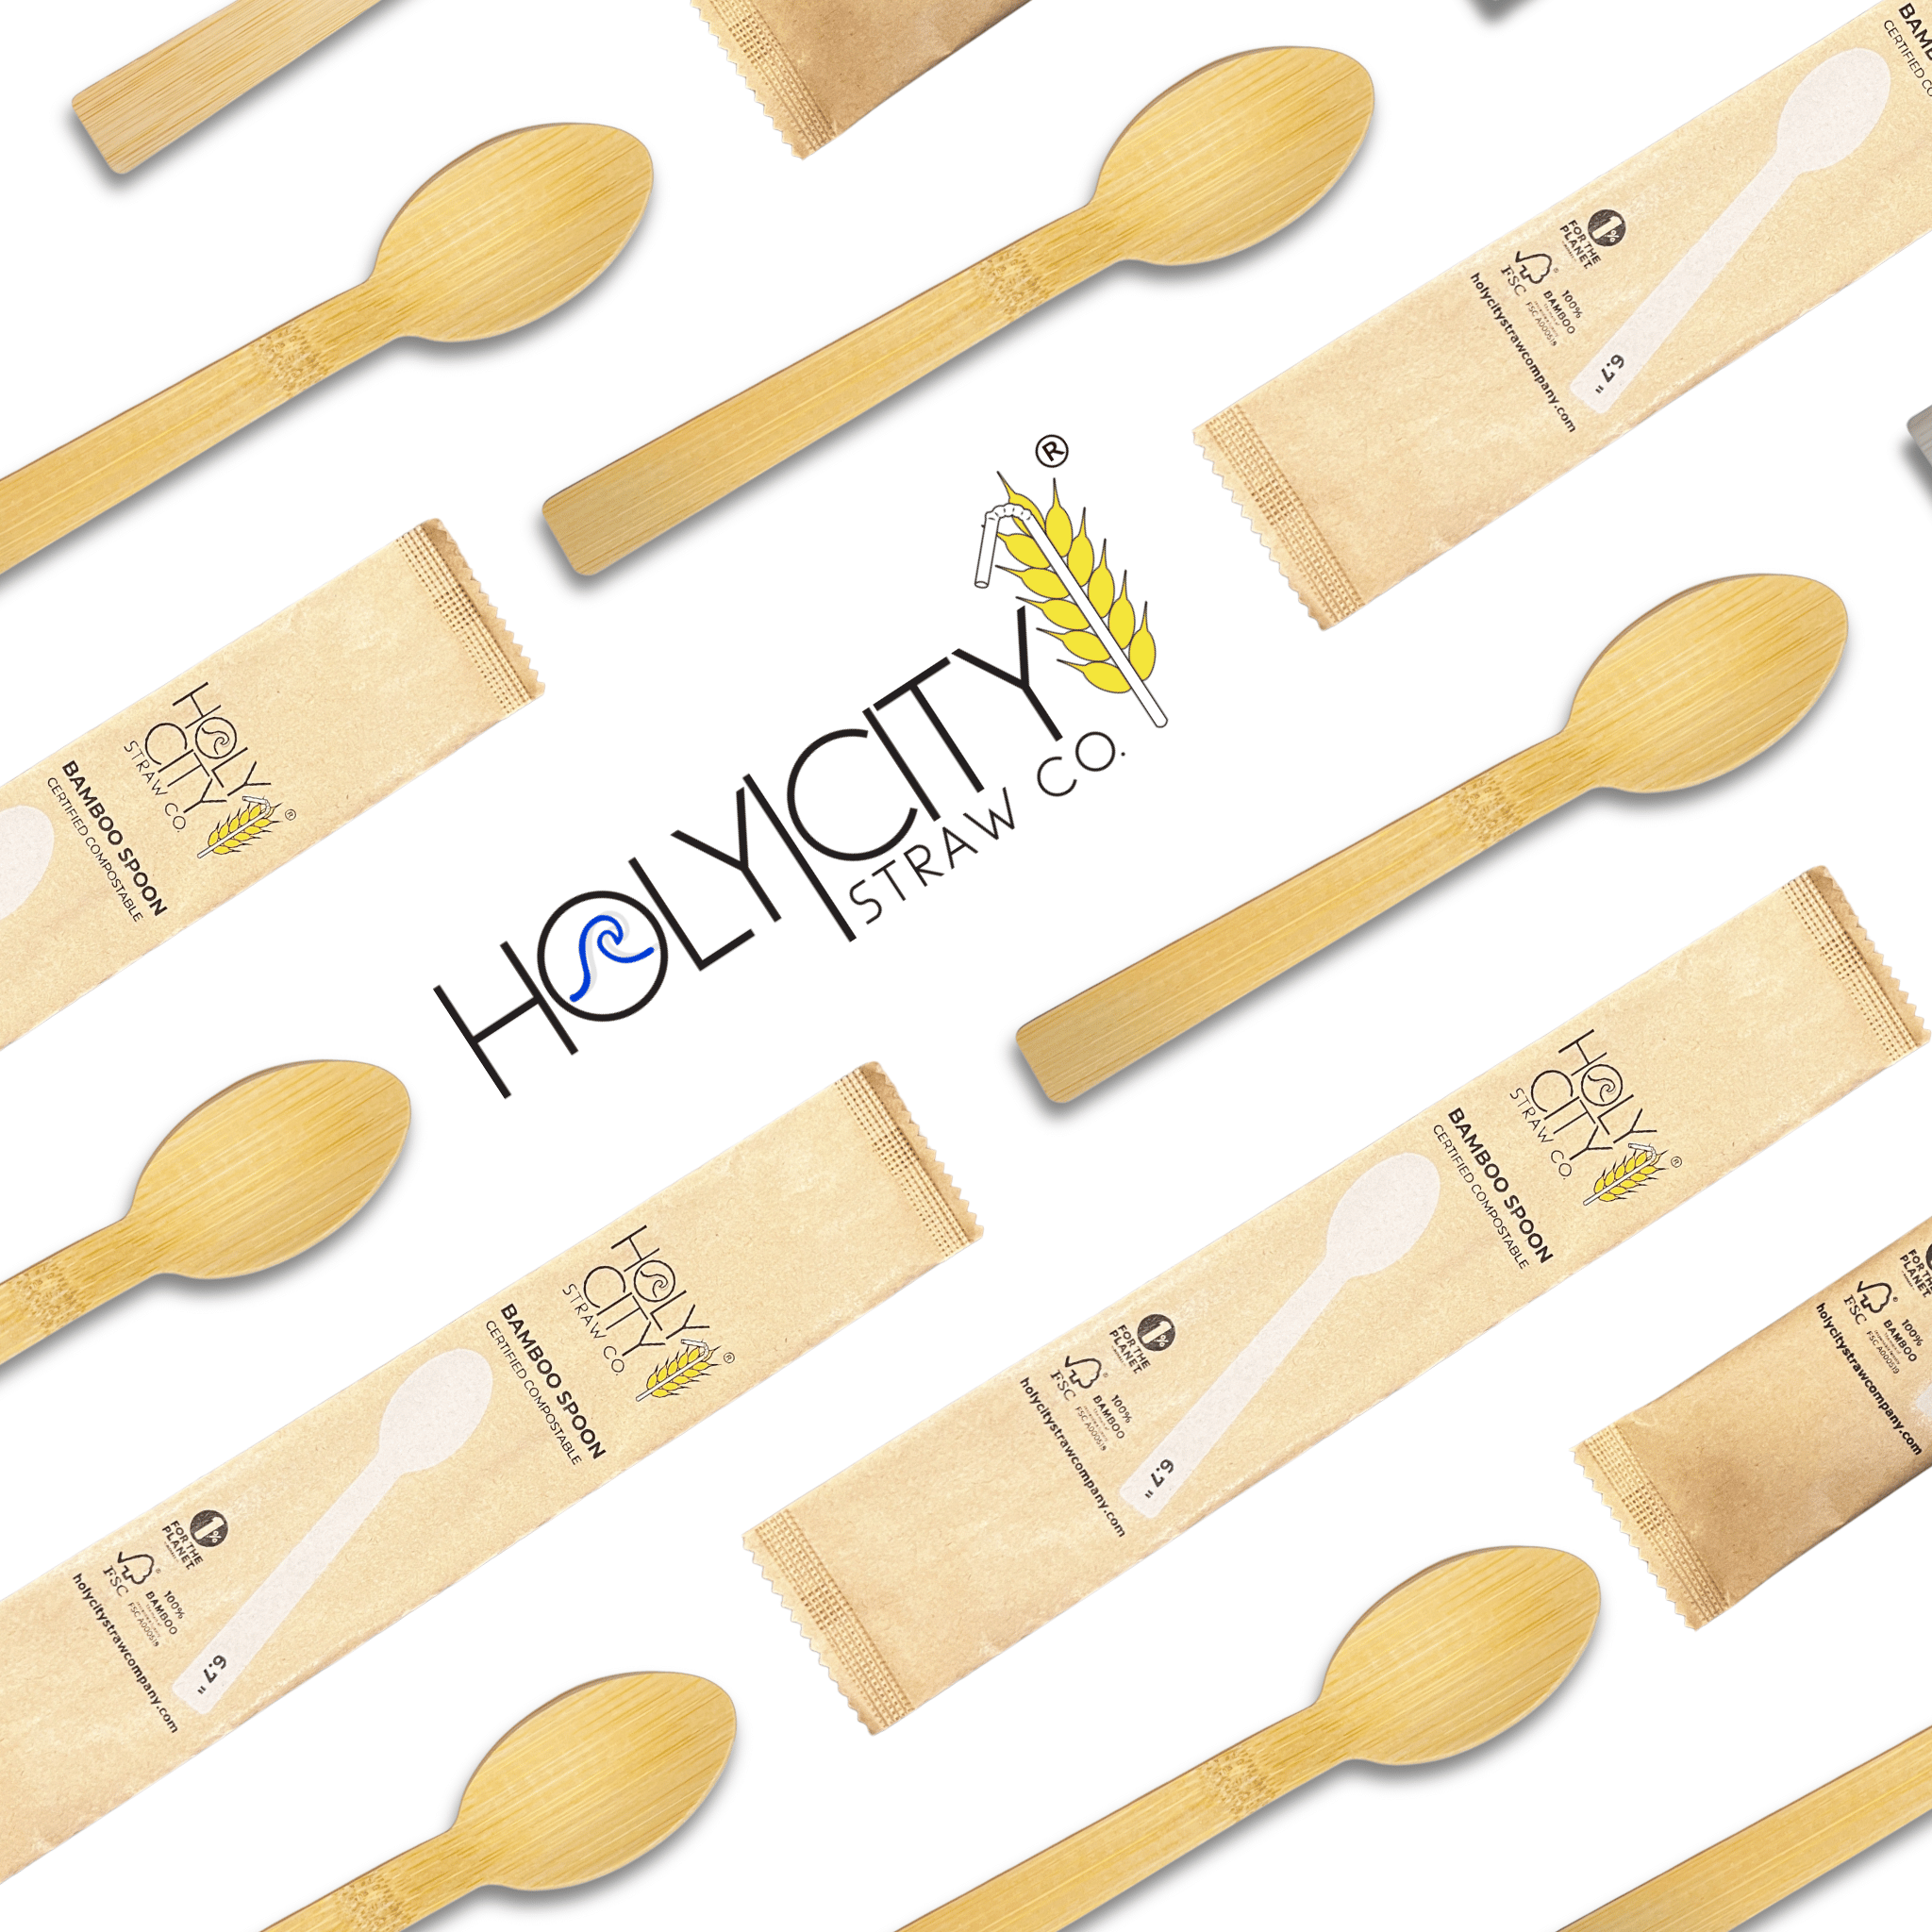 Holy City Straw Co. wrapped bamboo spoons lined up on angle